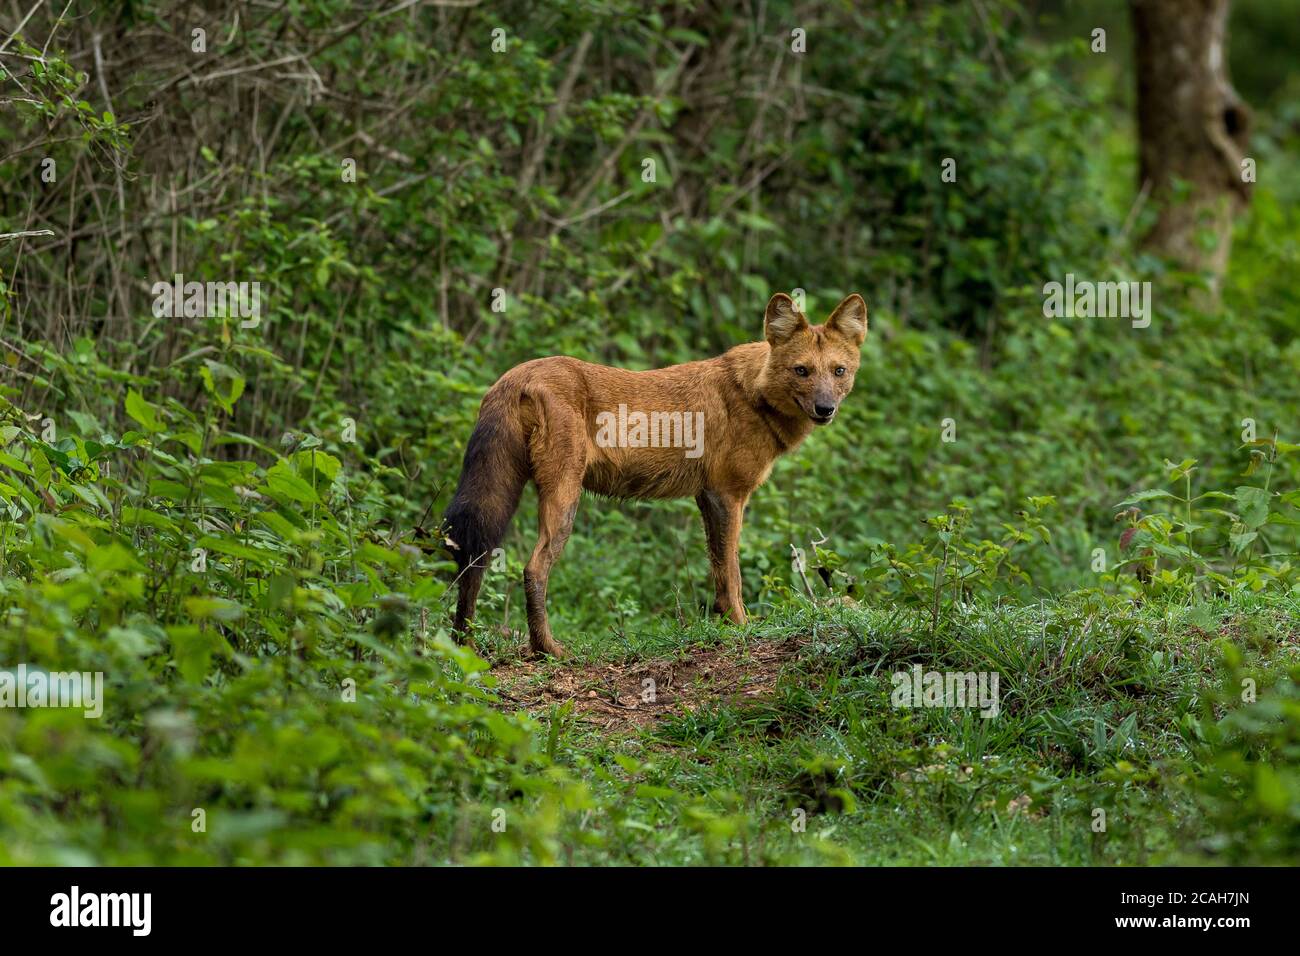 Portrait of a wild dog in the lush green tropical forest with greenery Stock Photo